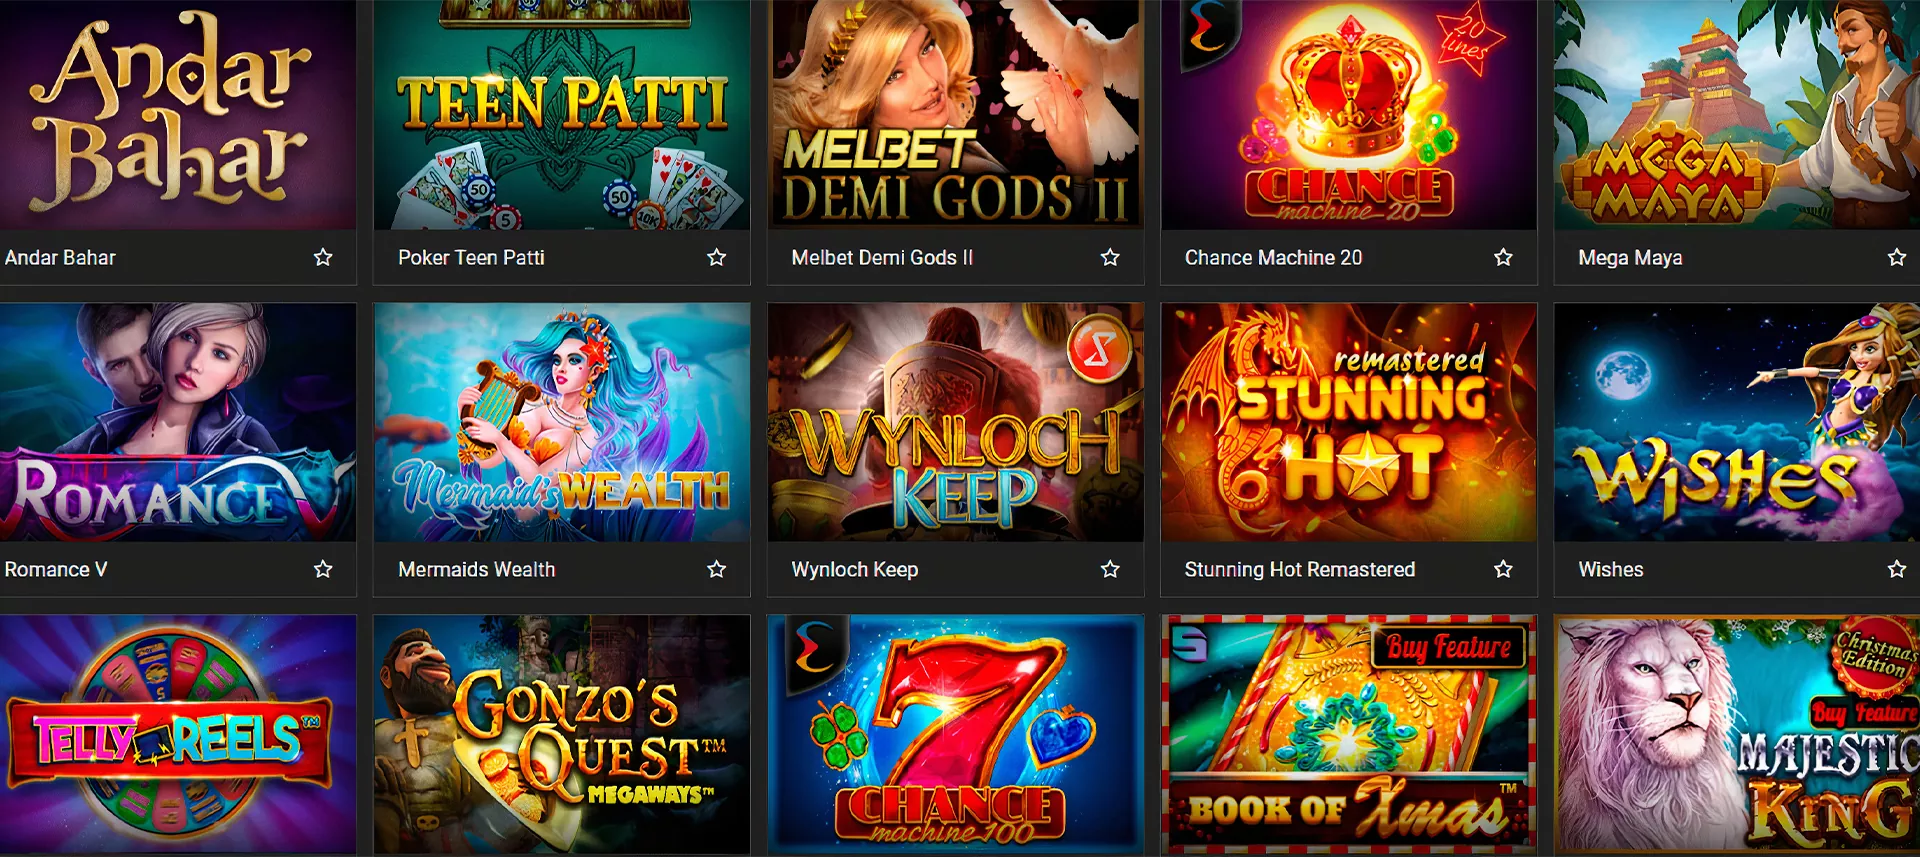 There are various kinds of slots on Melbet.